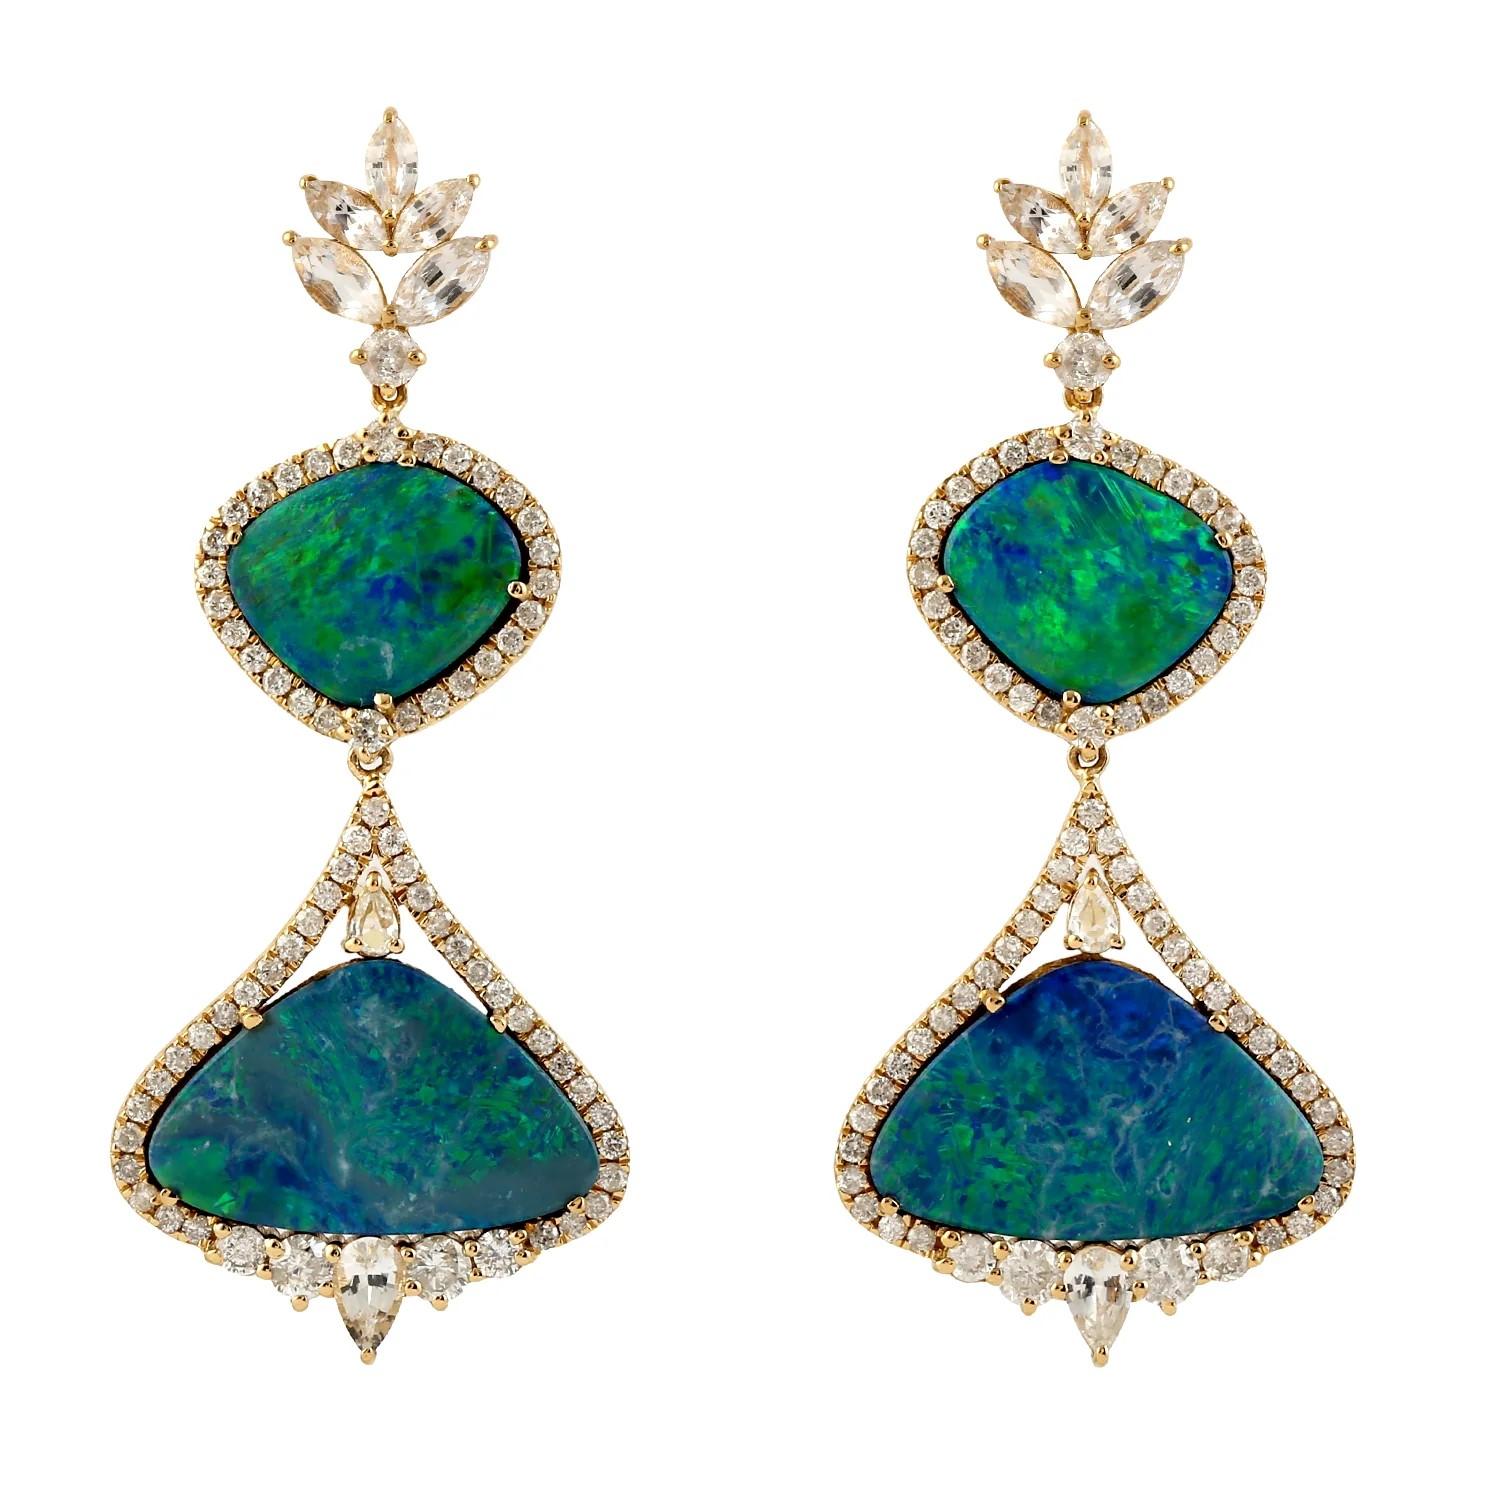 These beautiful drop earrings are handcrafted in 18-karat gold. It is set with 10.27 carats opal doublet and 1.73 carats of diamonds.

FOLLOW  MEGHNA JEWELS storefront to view the latest collection & exclusive pieces.  Meghna Jewels is proudly rated